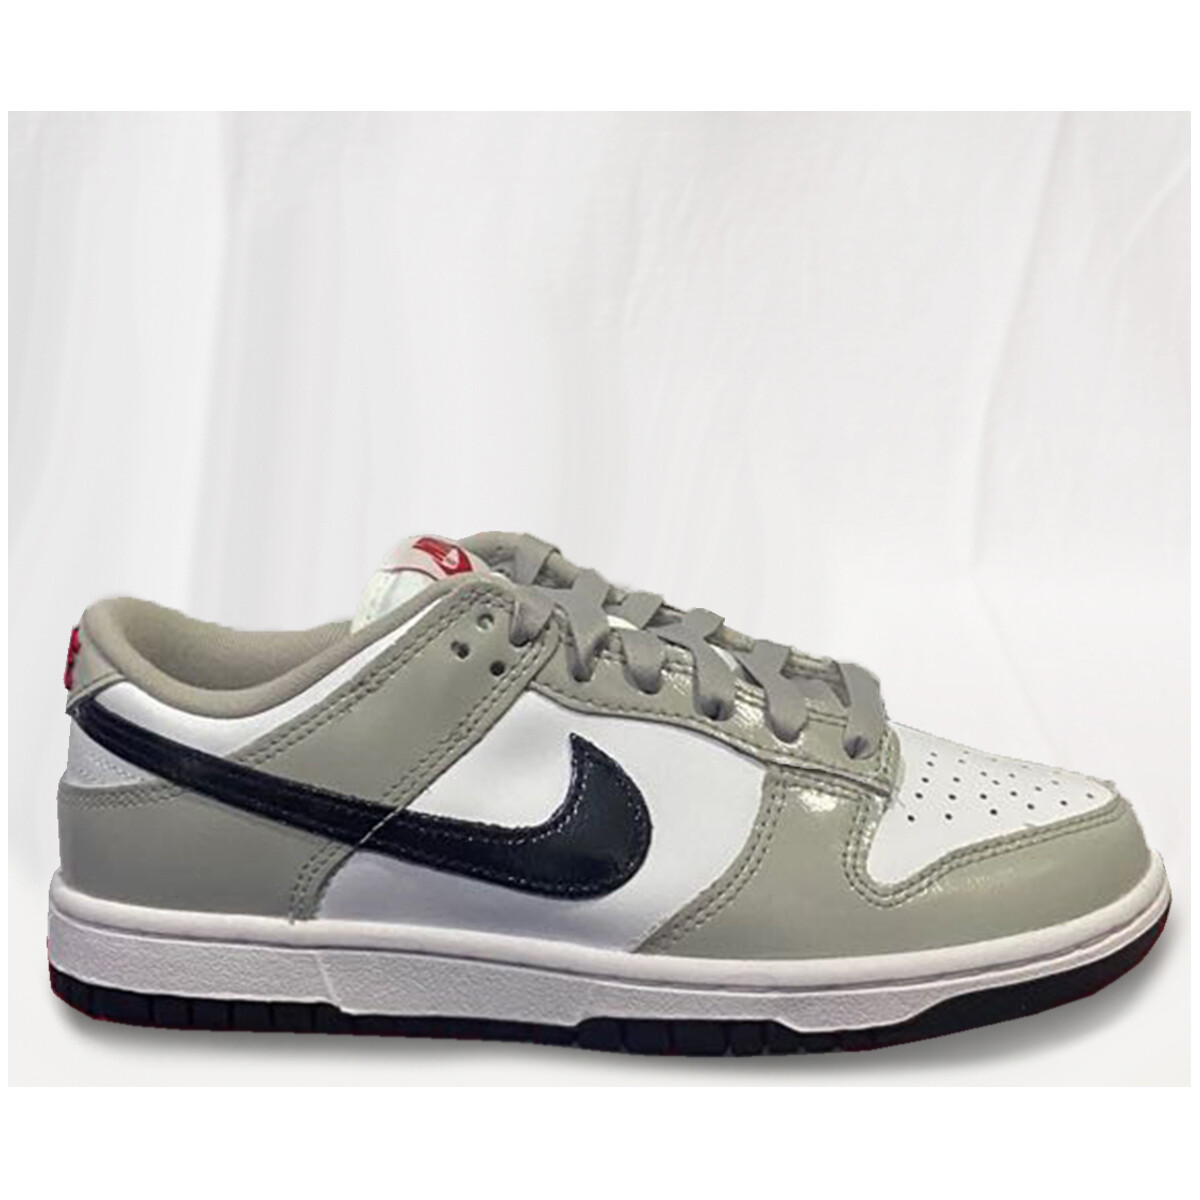 Nike Gris Nike Dunk Low ESS Light Iron Ore - DQ7576-001 - Taille : 38.5 FR nkx3Rssb